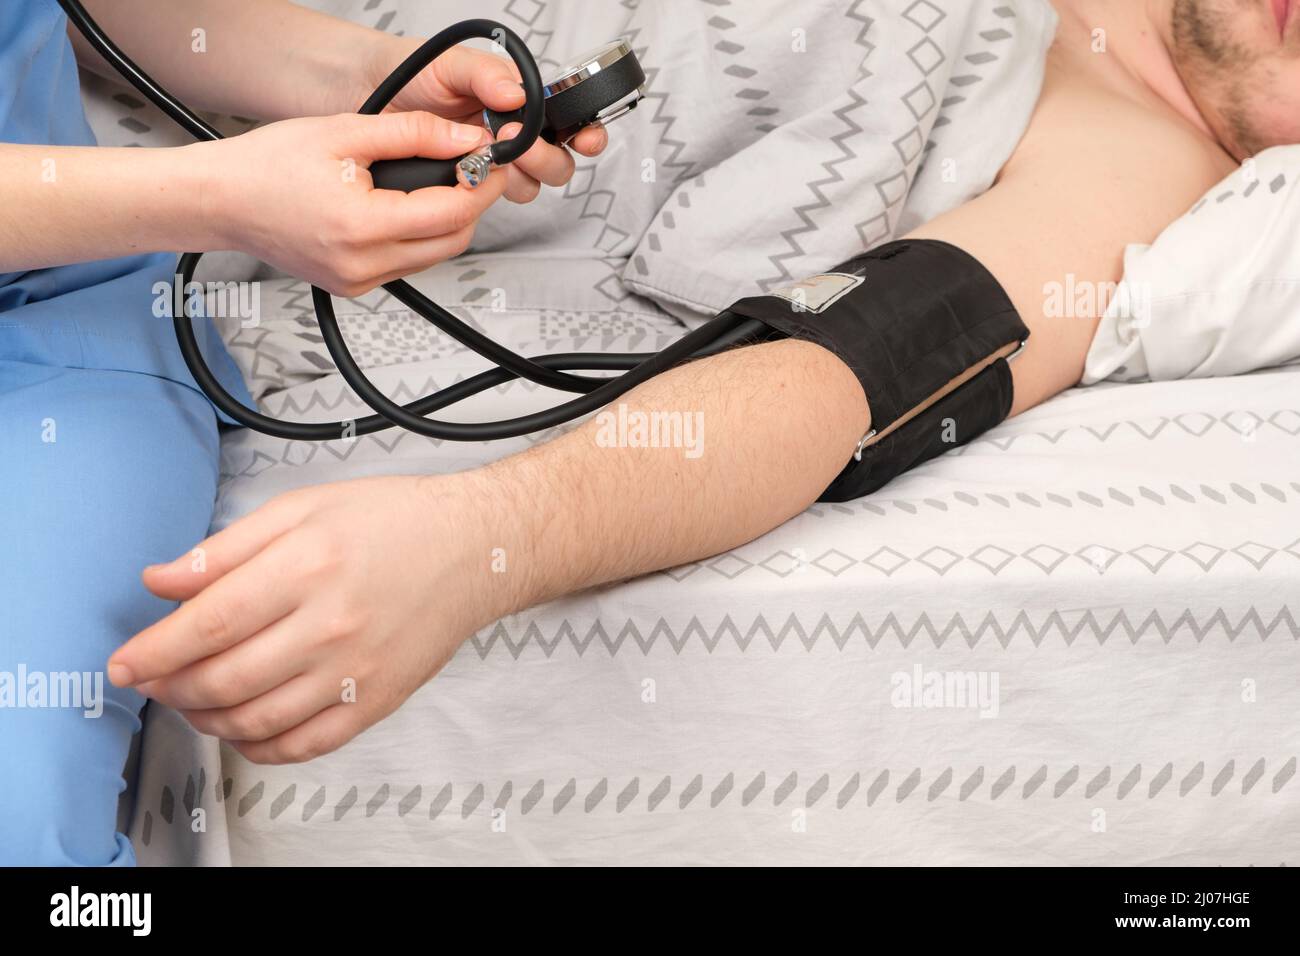 The doctor measures the blood pressure of man lying in bed. Diseases of the heart and blood vessels in humans, mechanical tonometer close up. Stock Photo